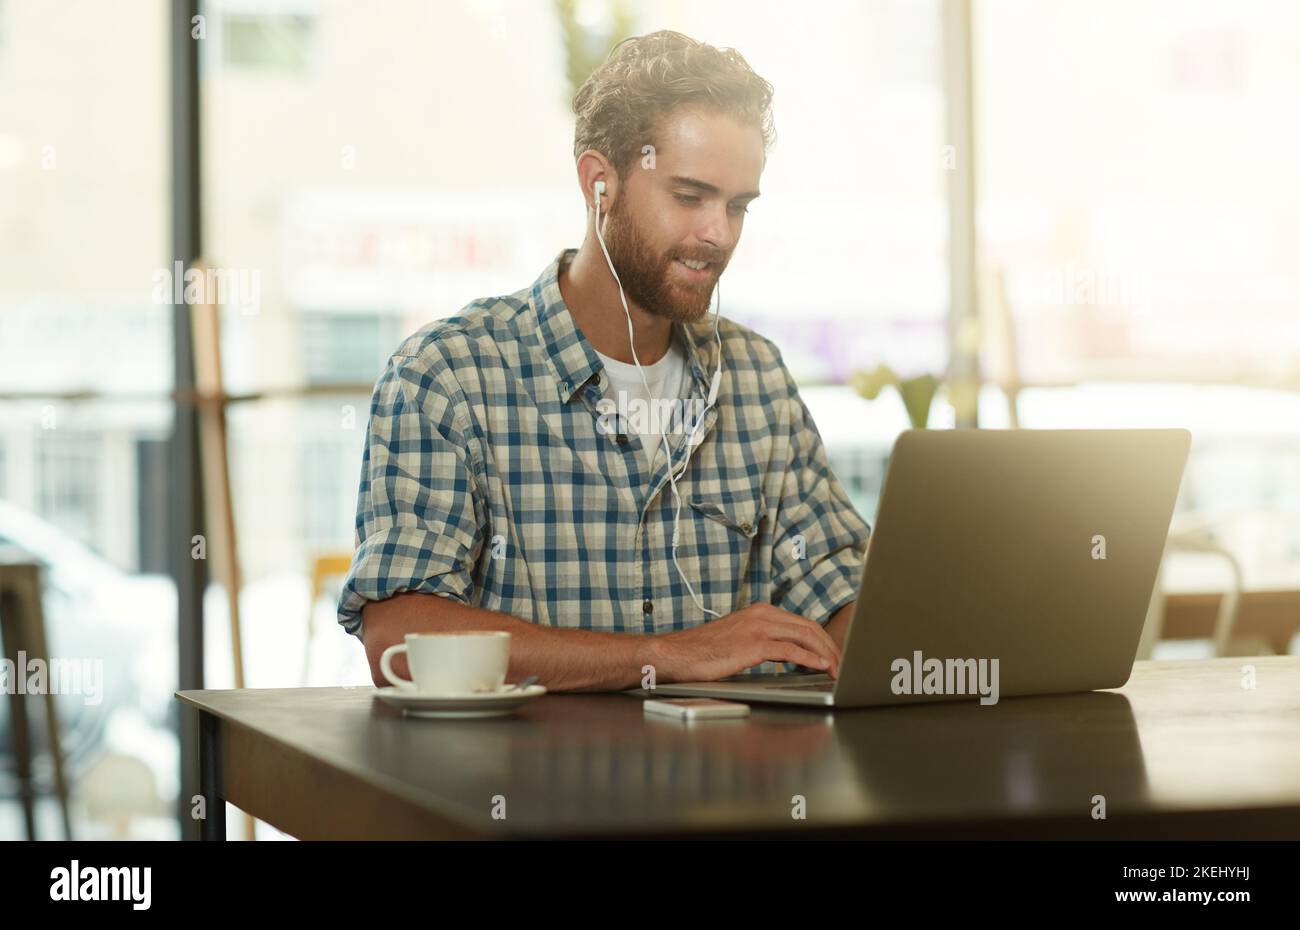 Productivity is key. a young man with earphones using a laptop in a cafe. Stock Photo